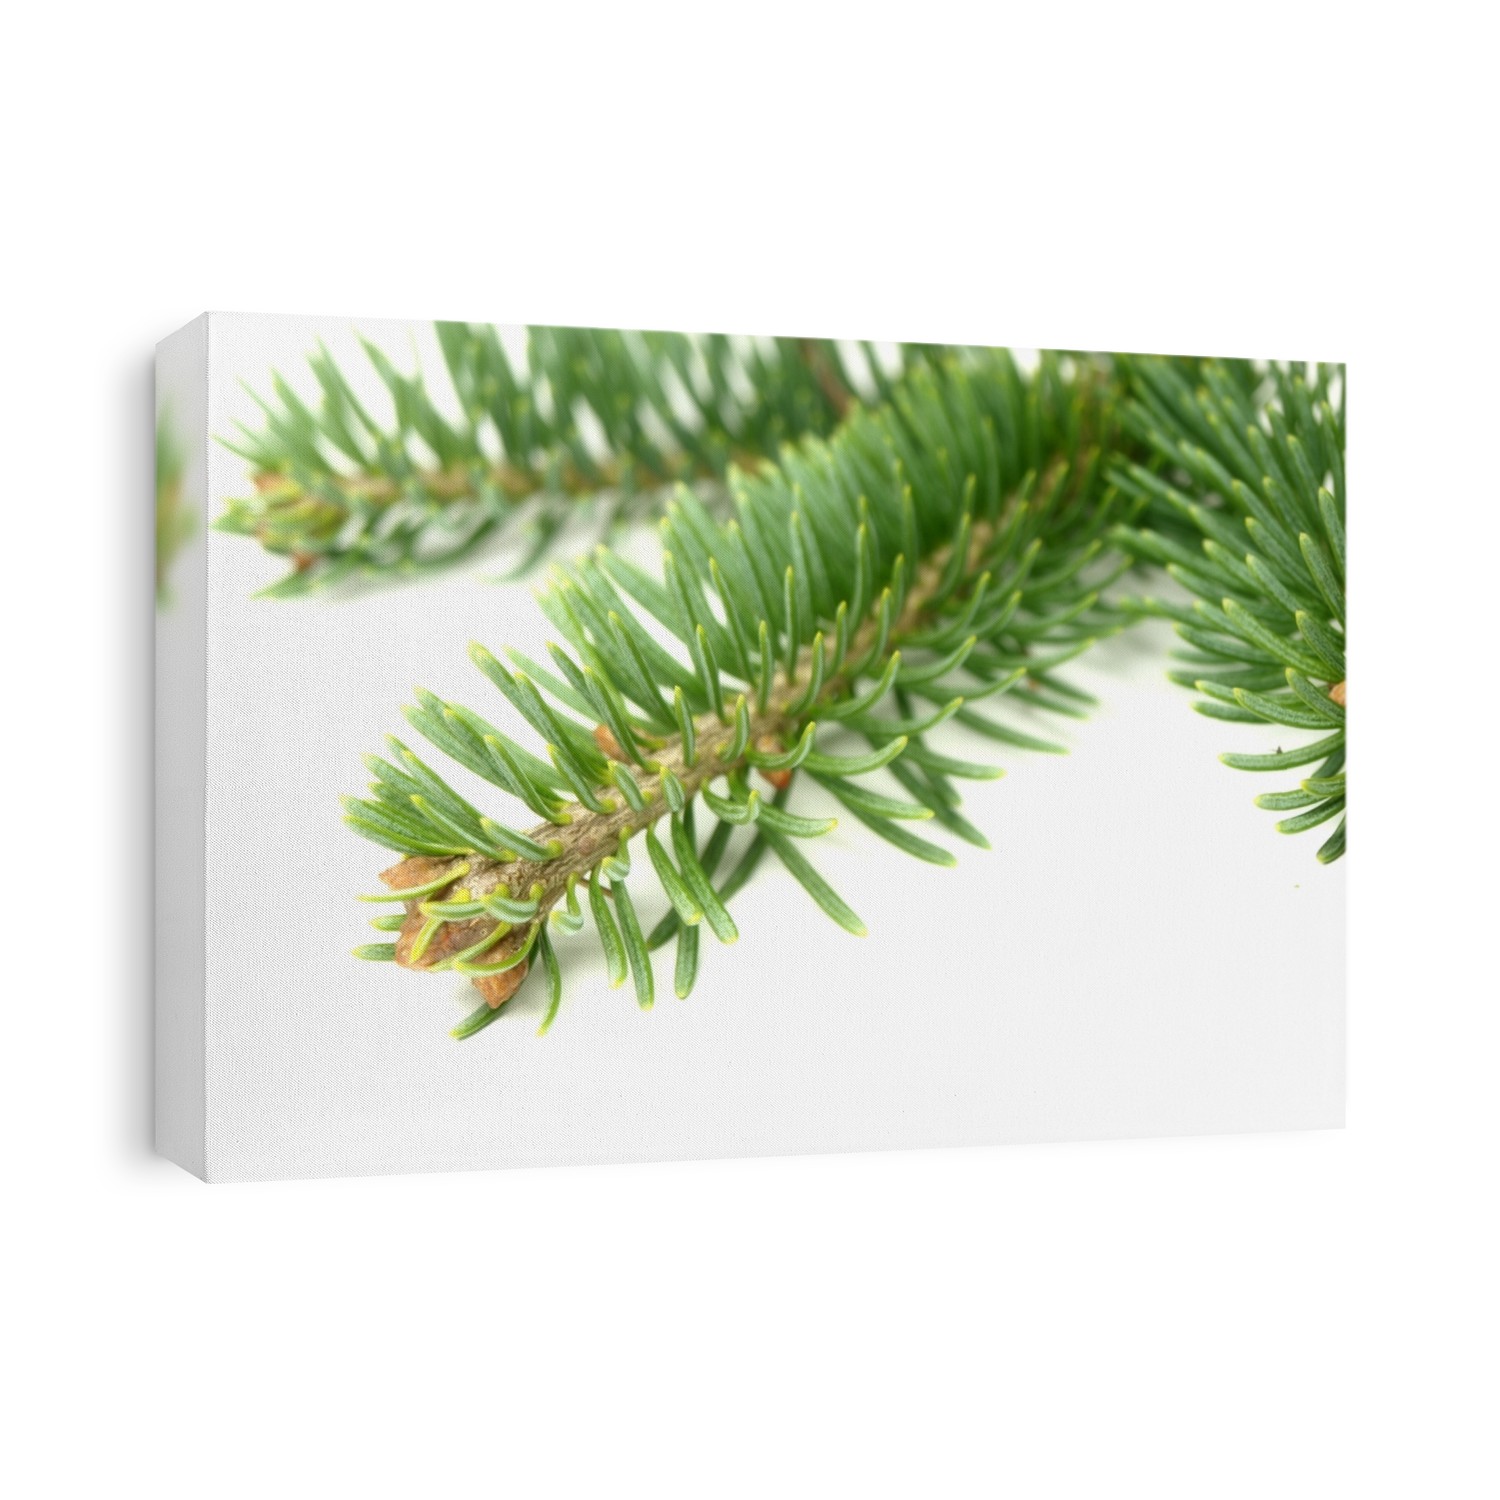 Abies lasiocarpa on white background